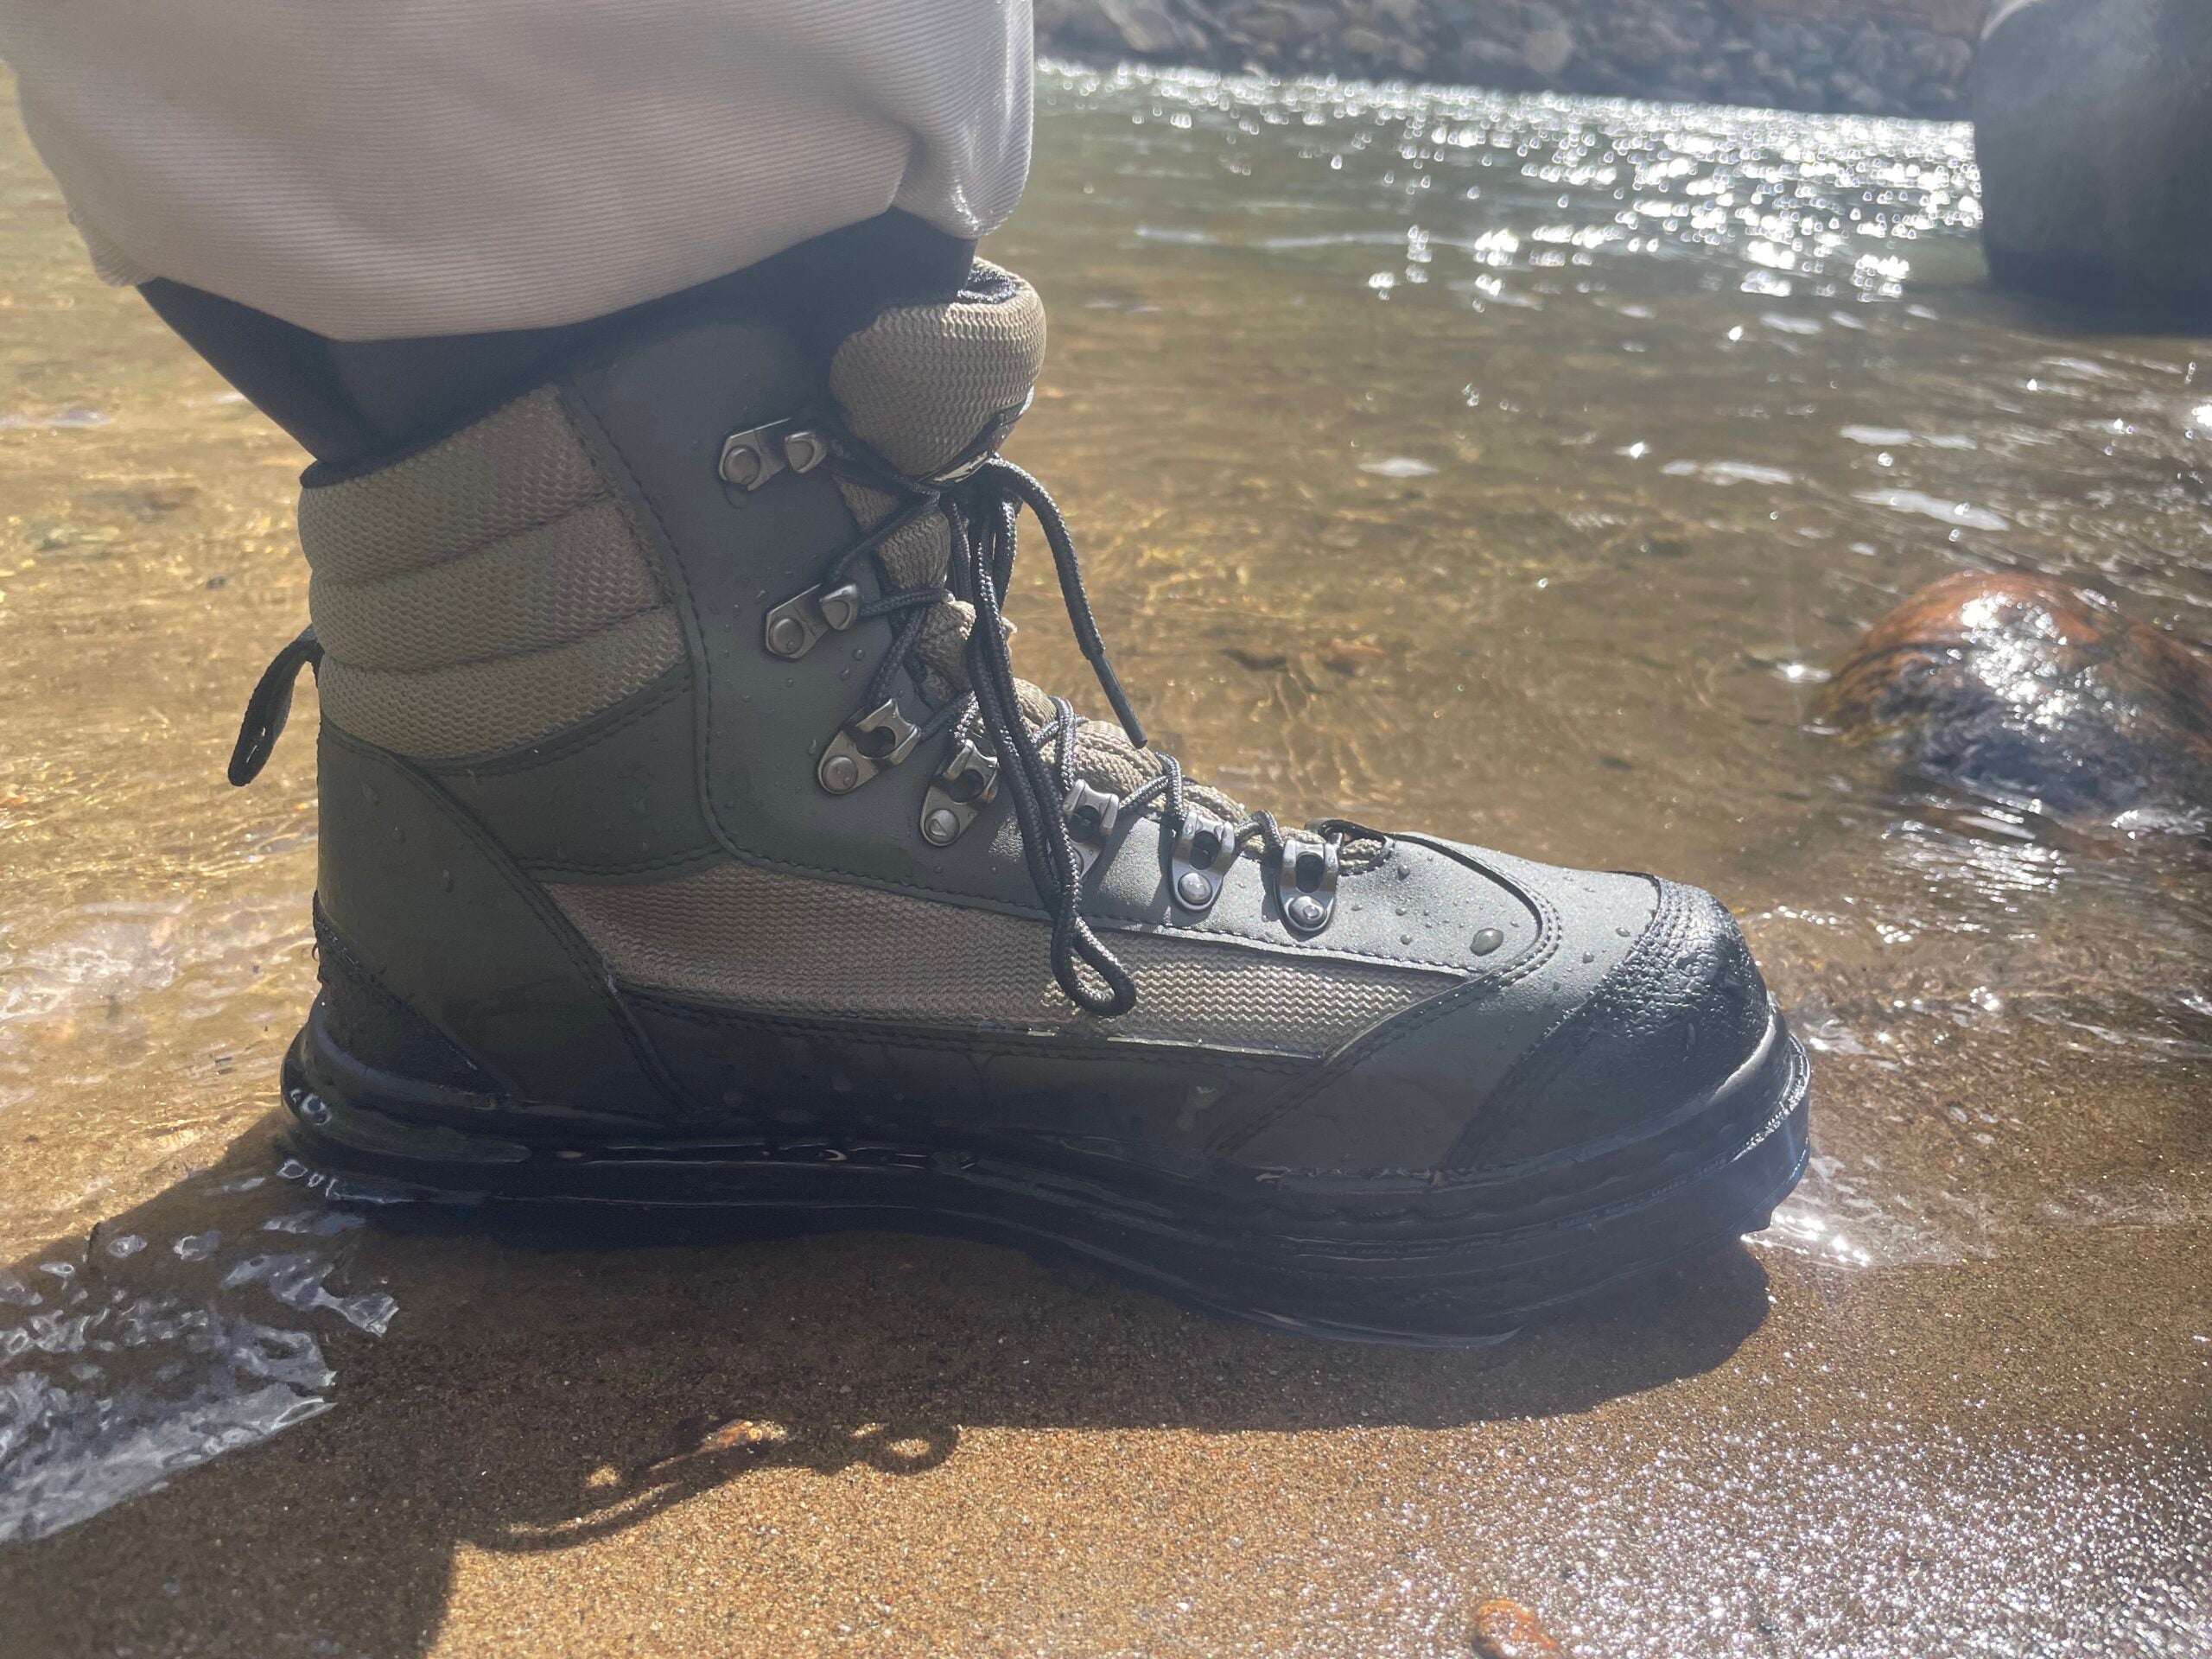  Foxelli Wading Boots – Lightweight Wading Boots for